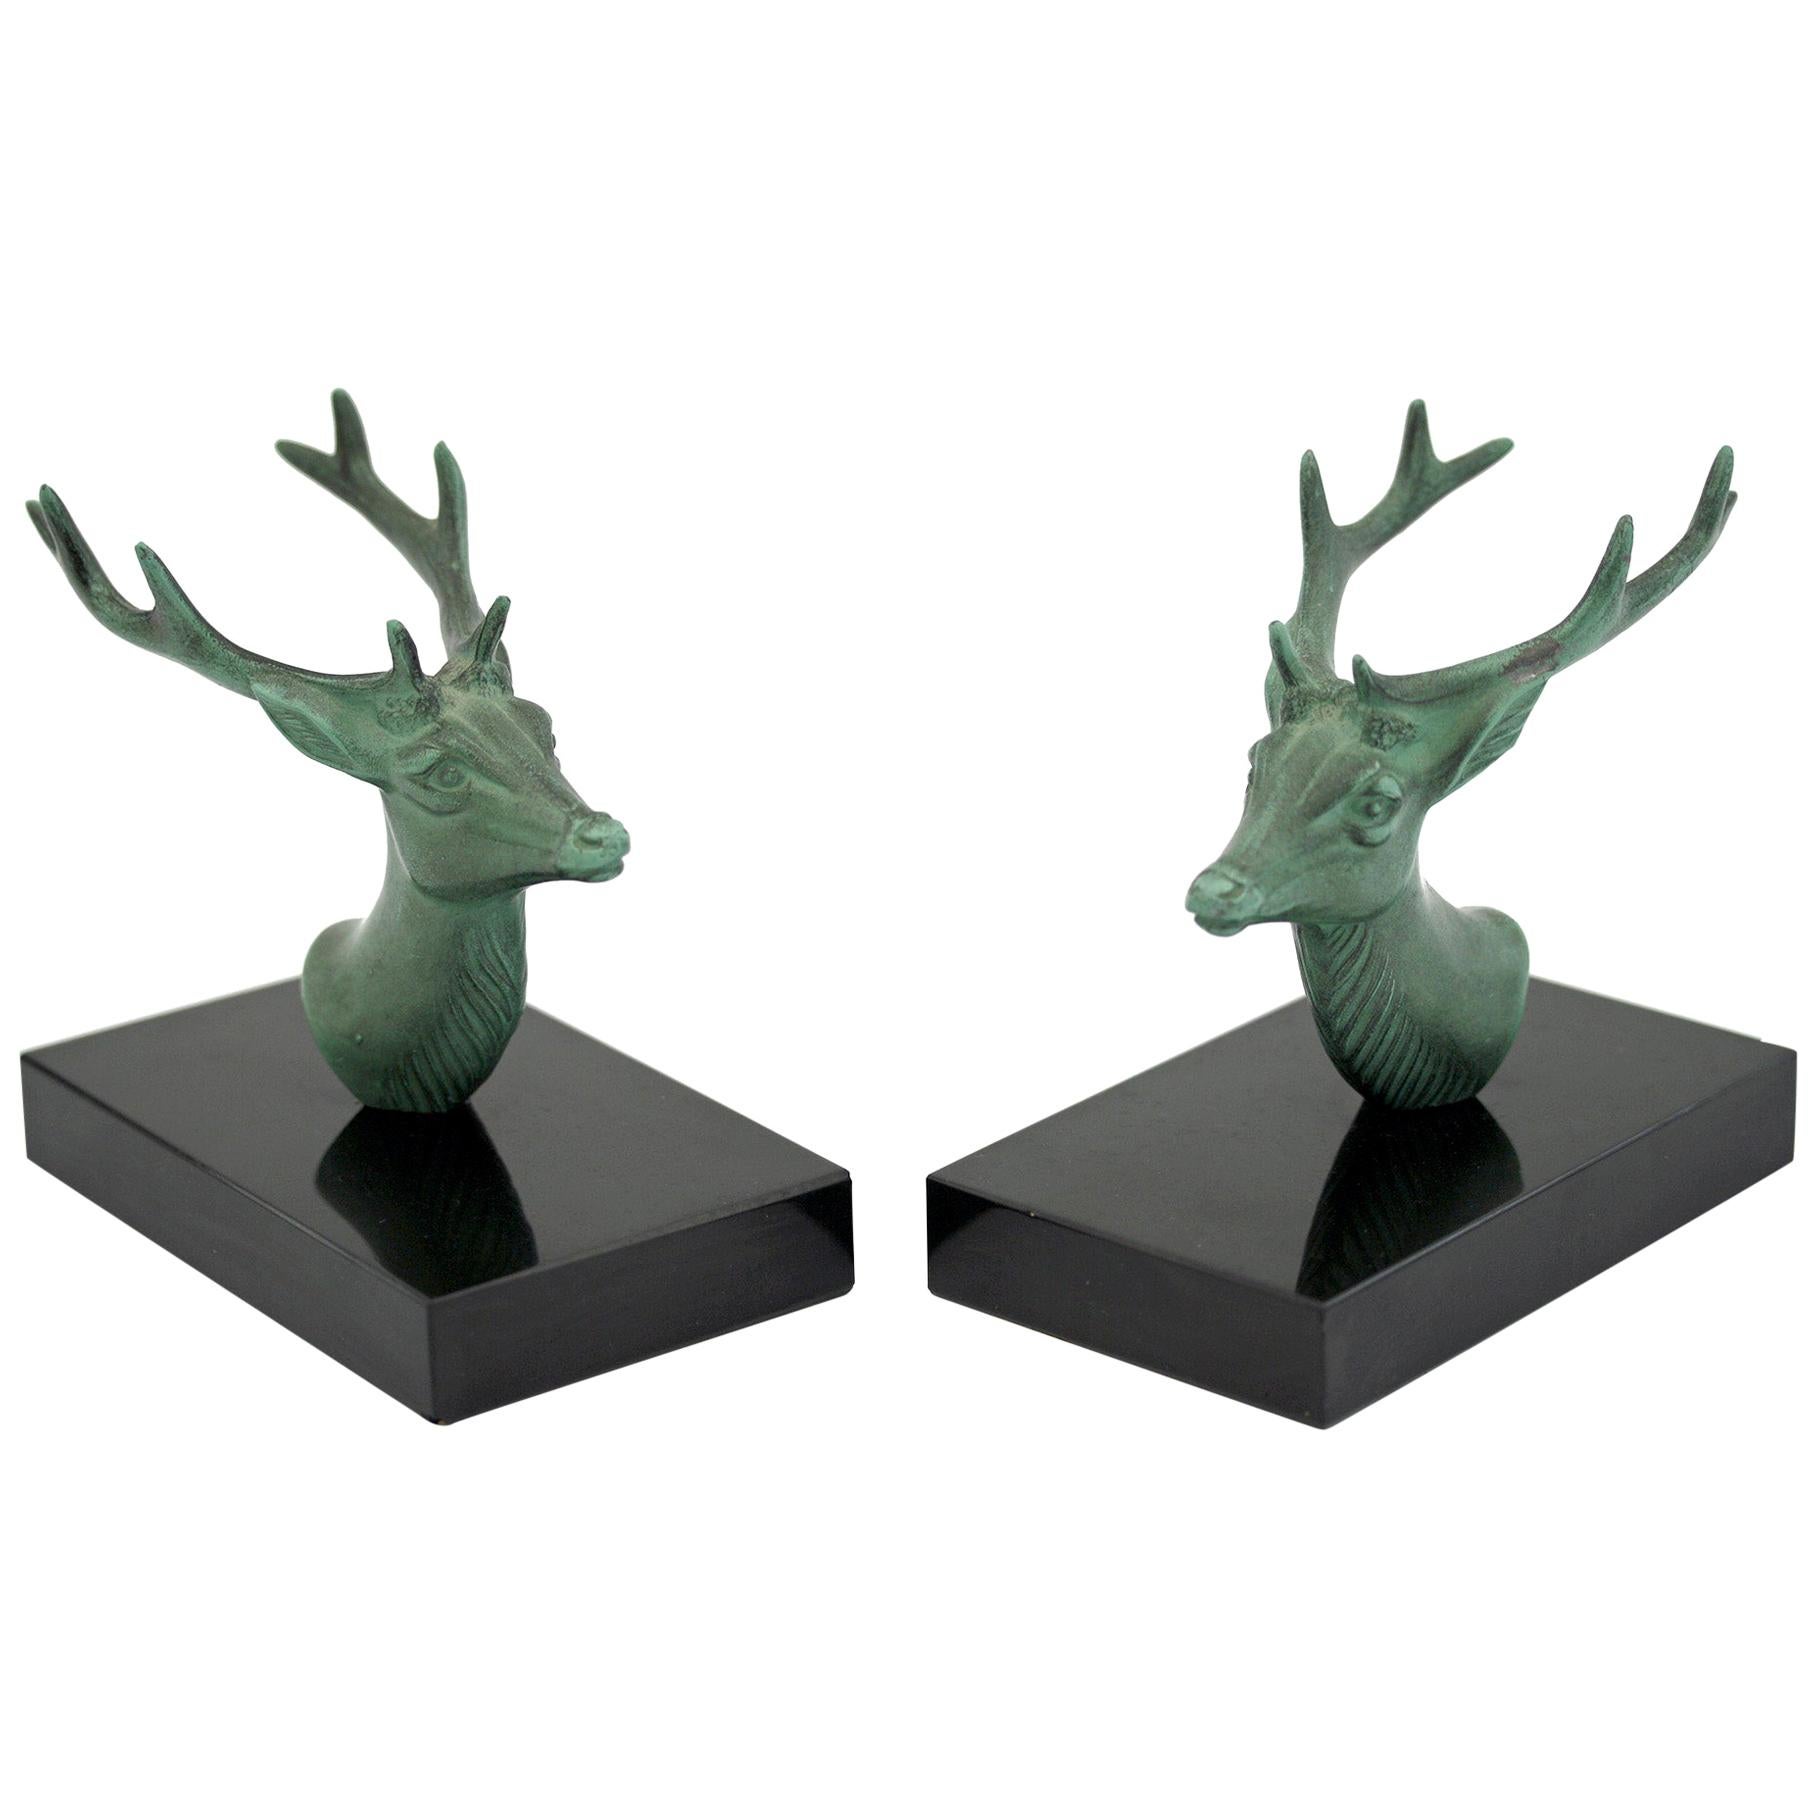 P Mimaux French Art Deco Green Patinated Stag Head Bookends